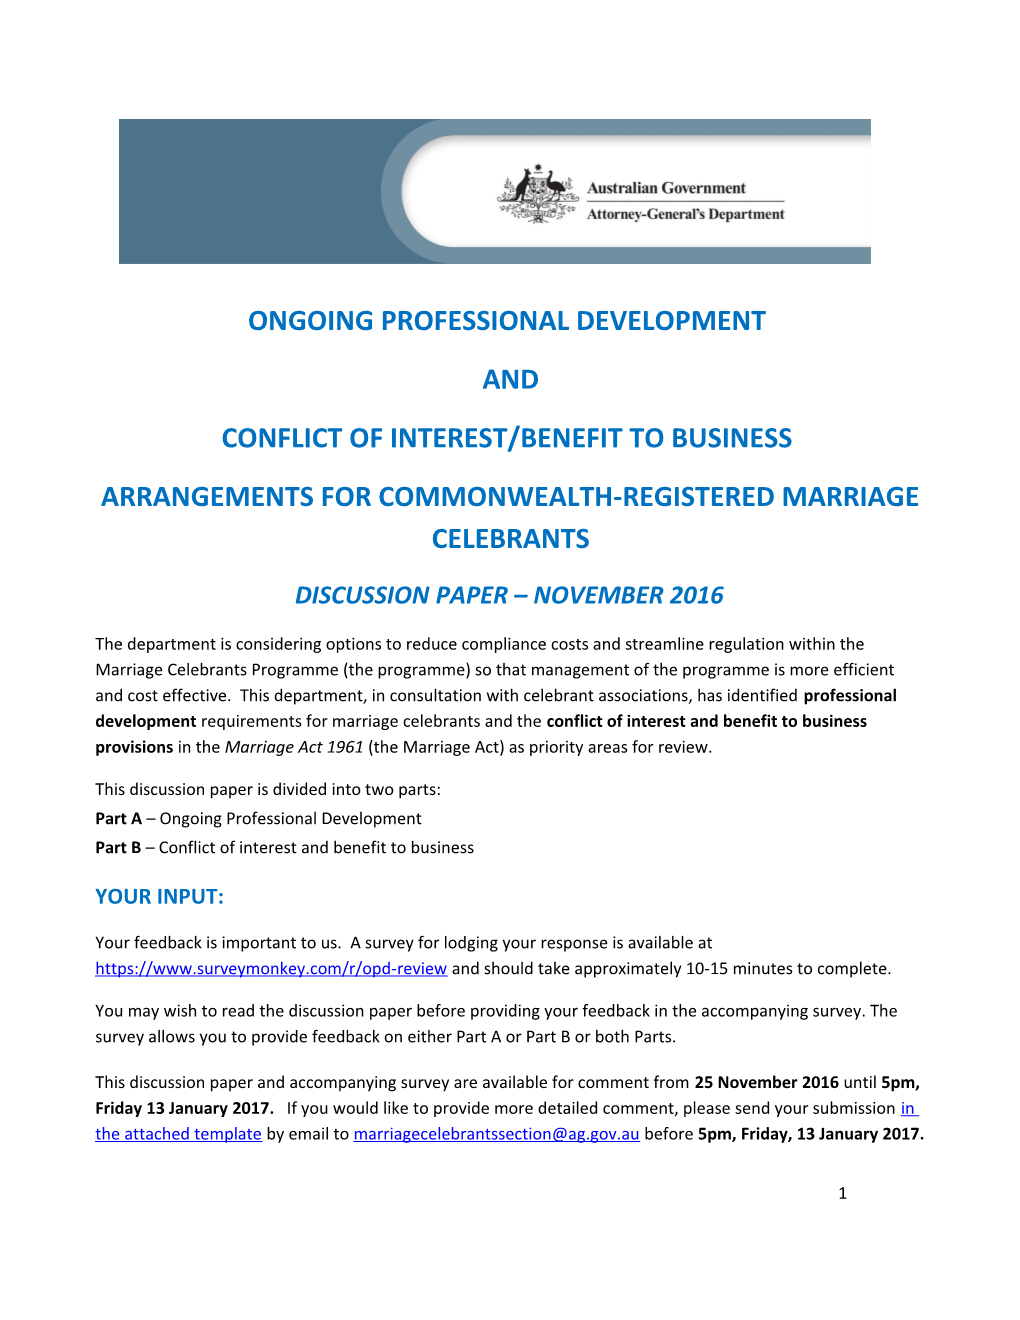 Ongoing Professional Development for Commonwealth-Registered Marriage Celebrants and Conflict